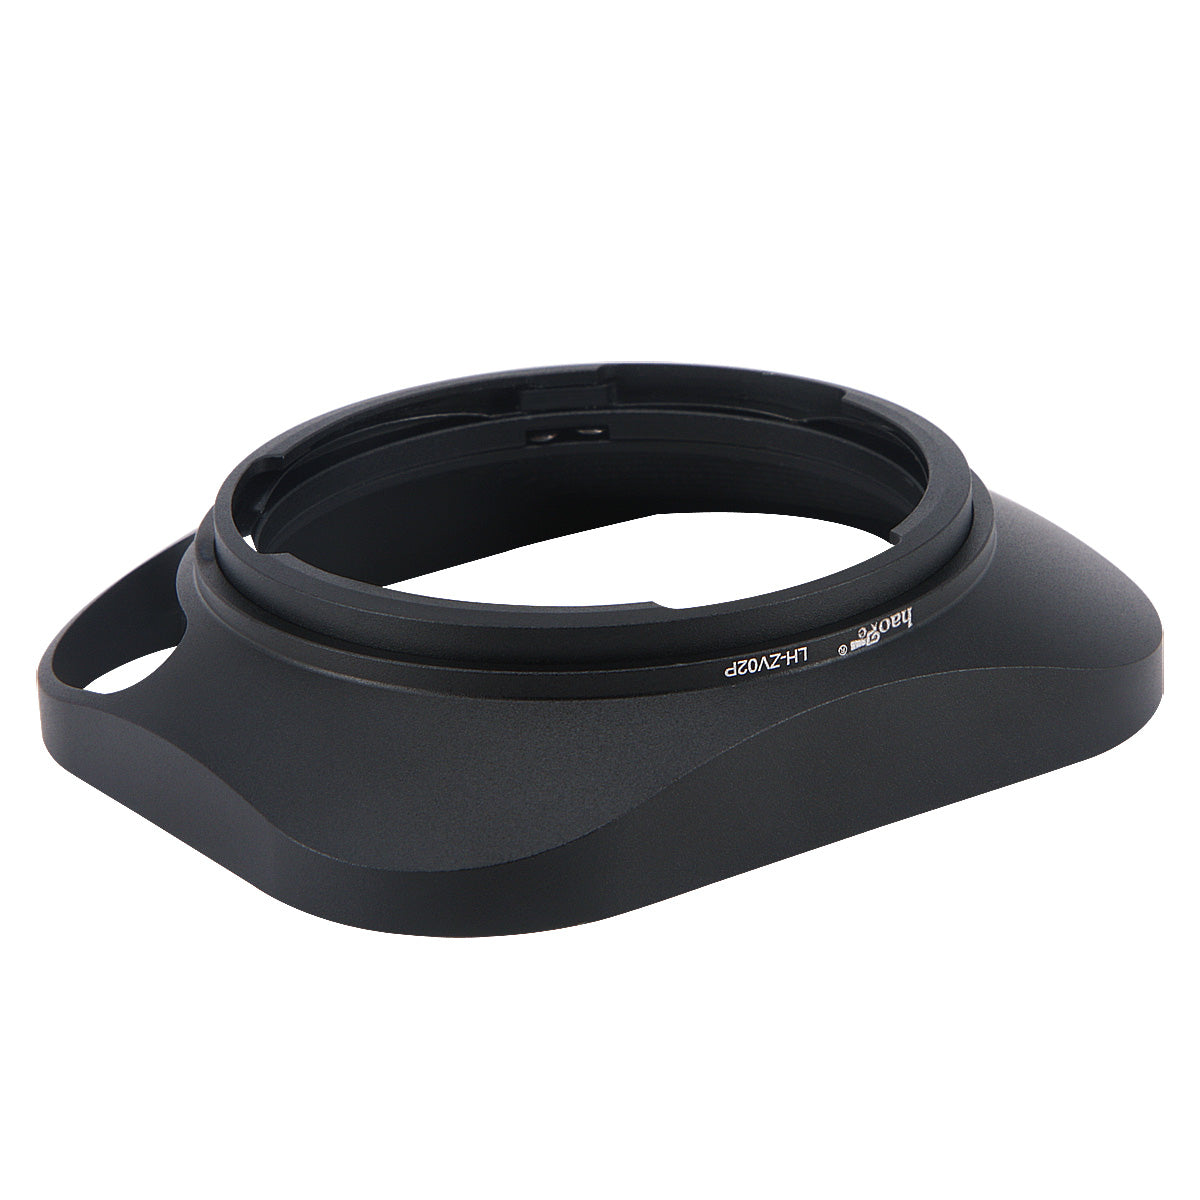 Haoge LH-ZV02P Lens Hood for Carl Zeiss Biogon T 2/35 35mm f2 ZM, C Biogon T 2.8/35 35mm f2.8 ZM, Planar T 2/50 50mm f2 ZM; Voigtlander NOKTON Classic 35mm f1.4 VM, 40mm f1.4 VM Hollow Out Designed